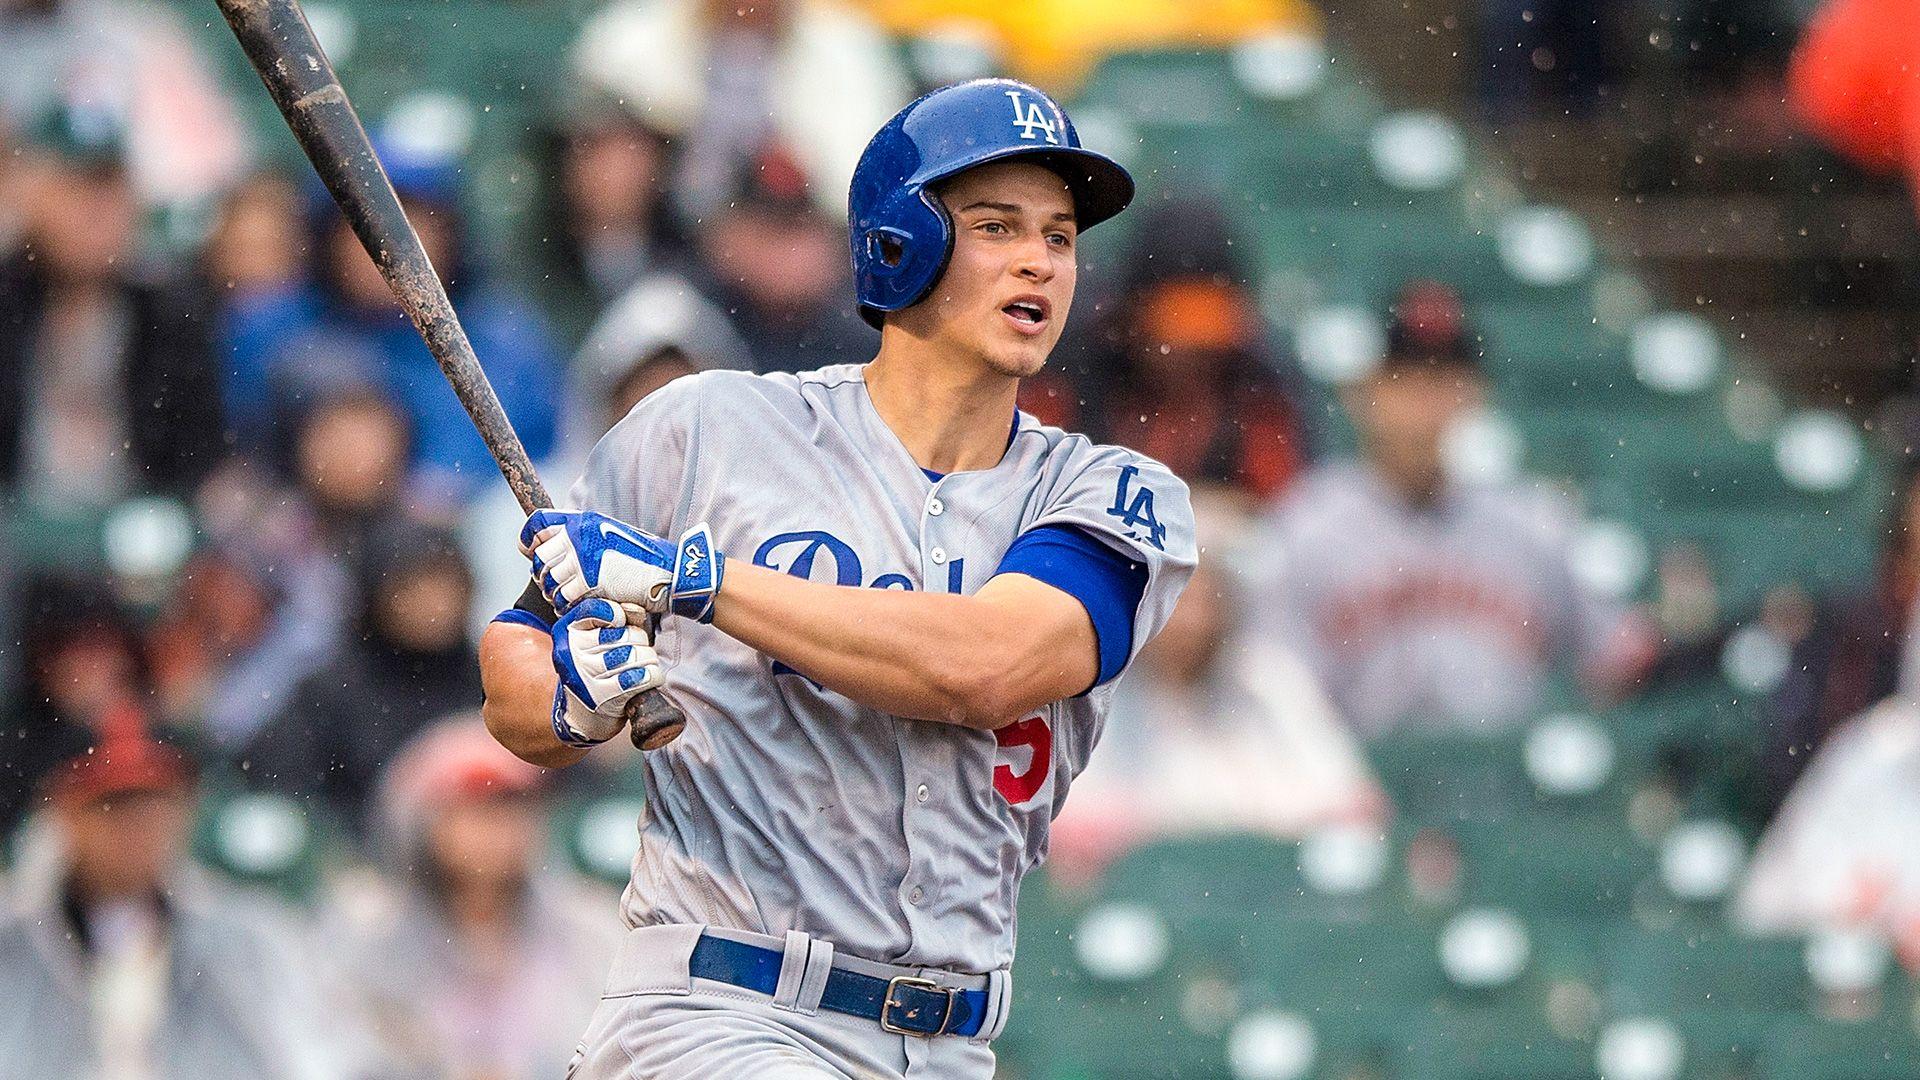 Corey Seager Live Wallpaper #fyp #foryoupage #baseball #sports #mlb @d